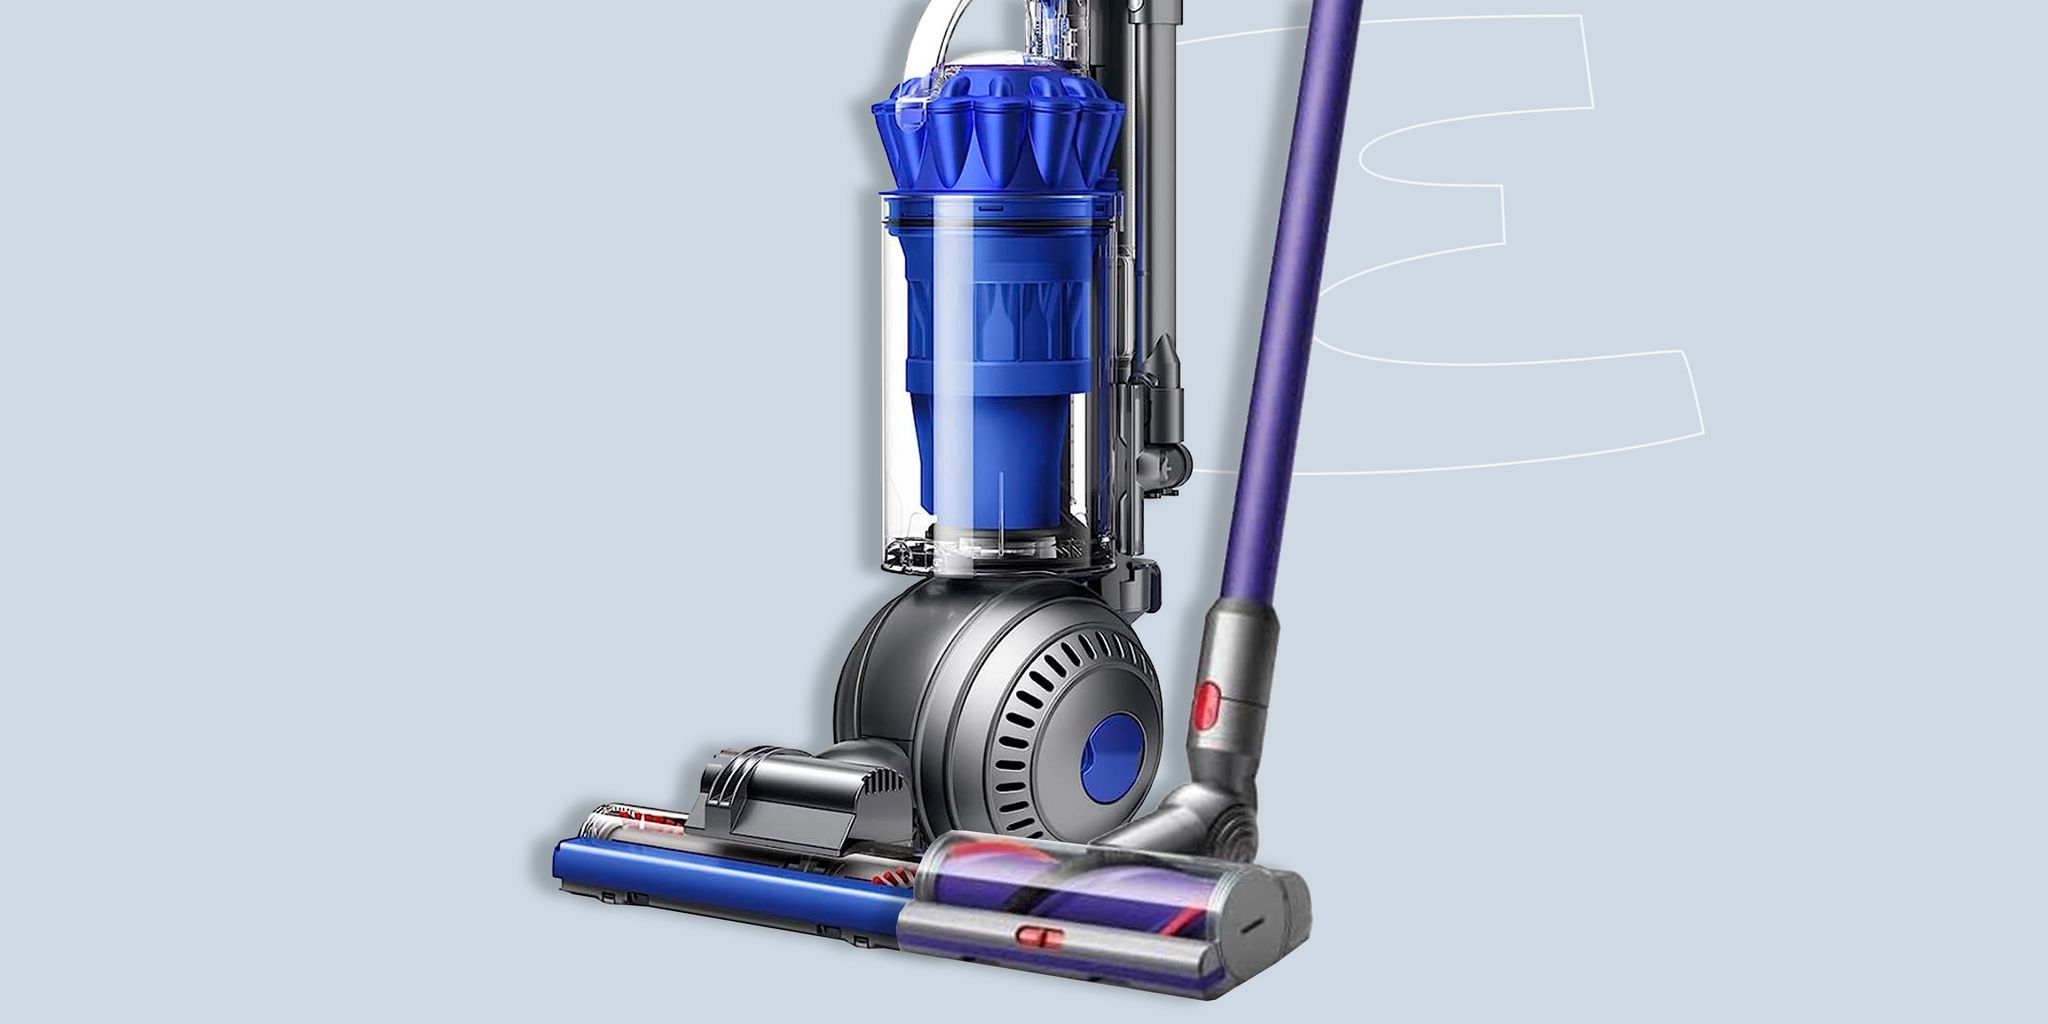 A Dyson Animal Vacuum Cleaner Is on Sale at